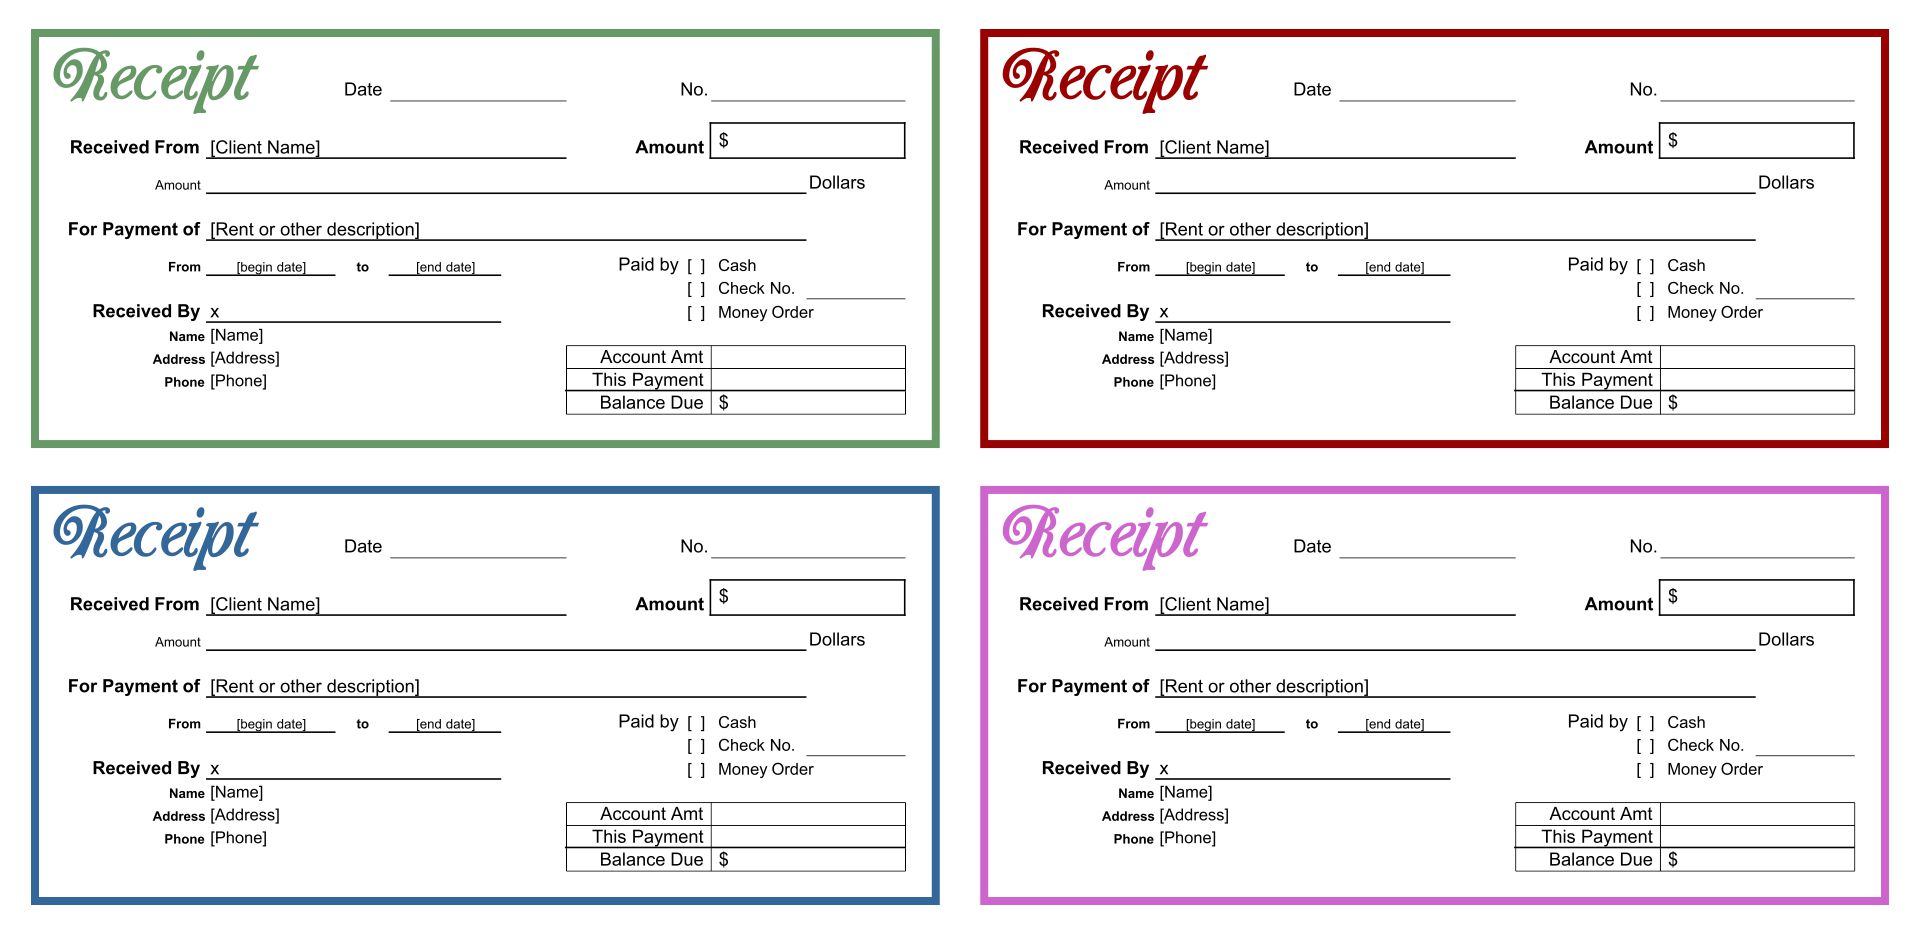 printable-cash-receipt-blank-forms-printable-forms-free-online